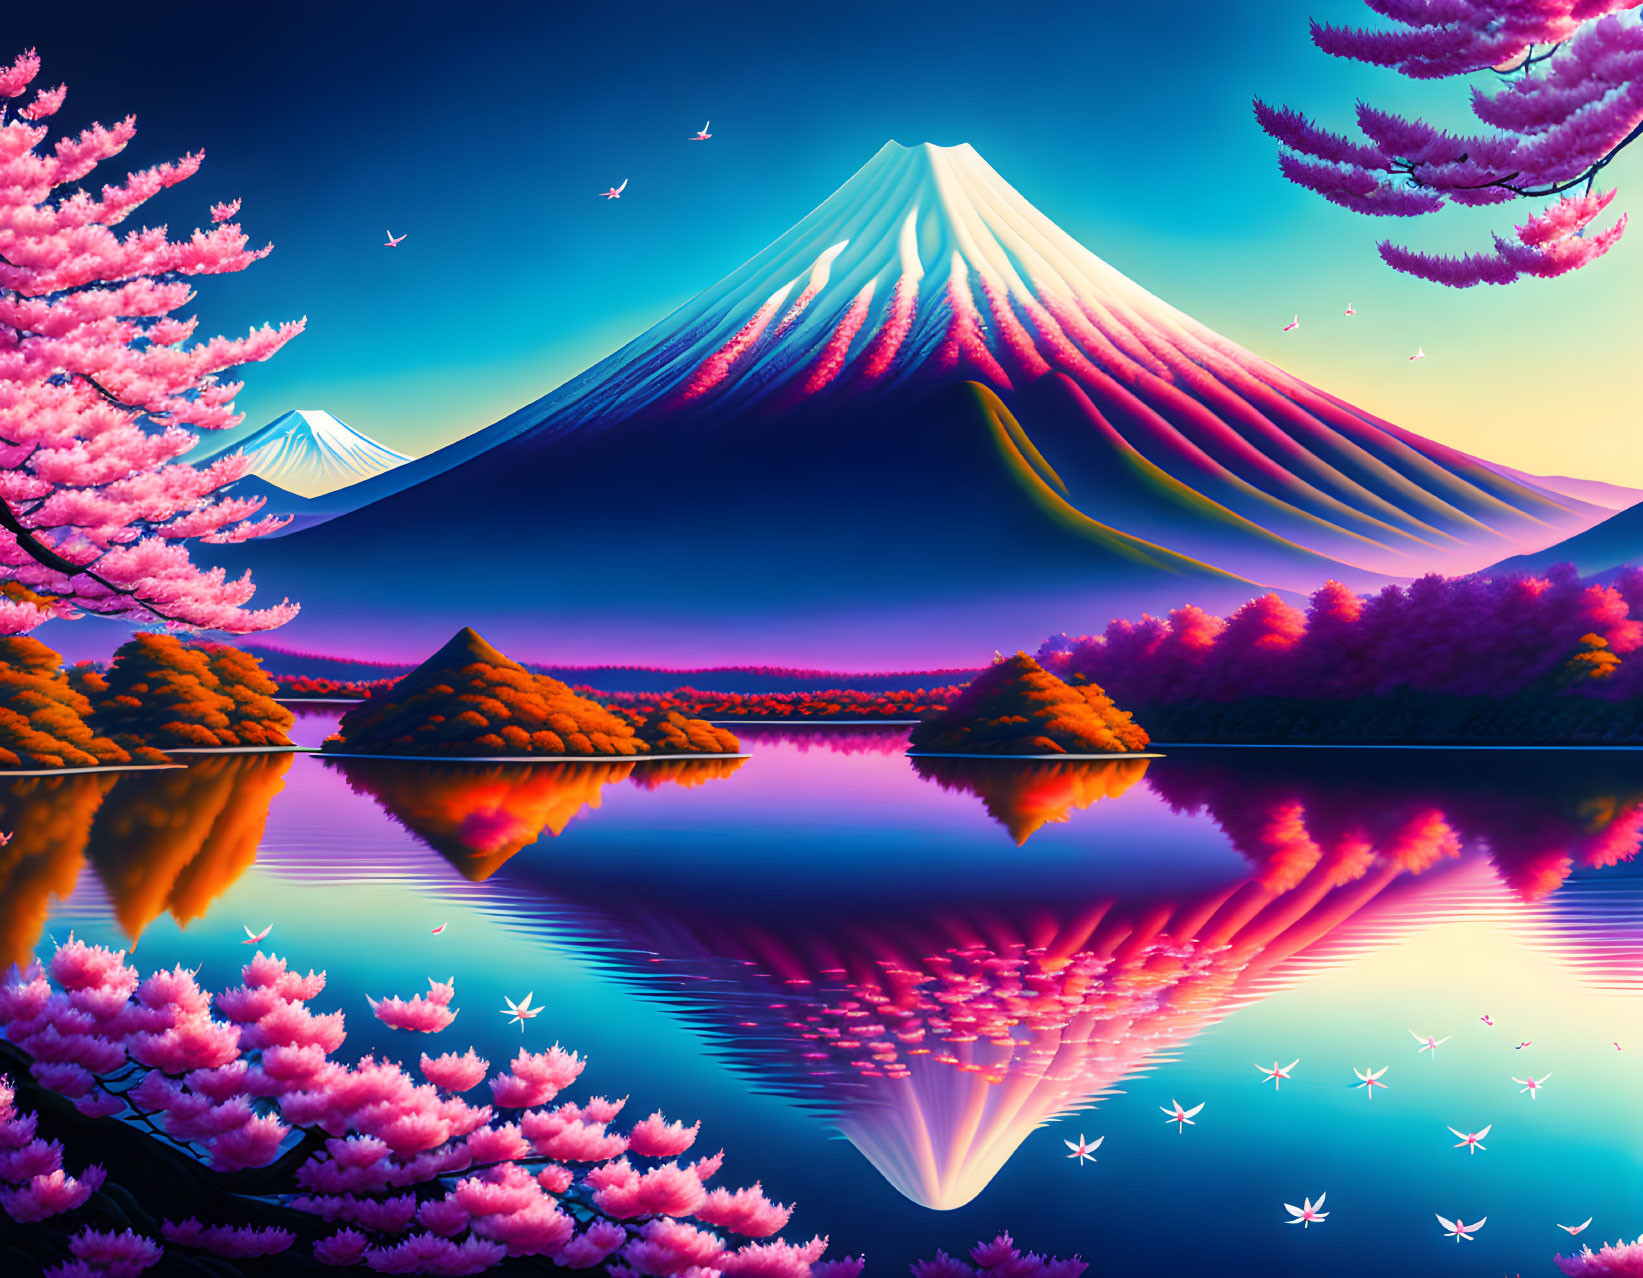 Scenic artwork: Mount Fuji with cherry blossoms by a tranquil lake